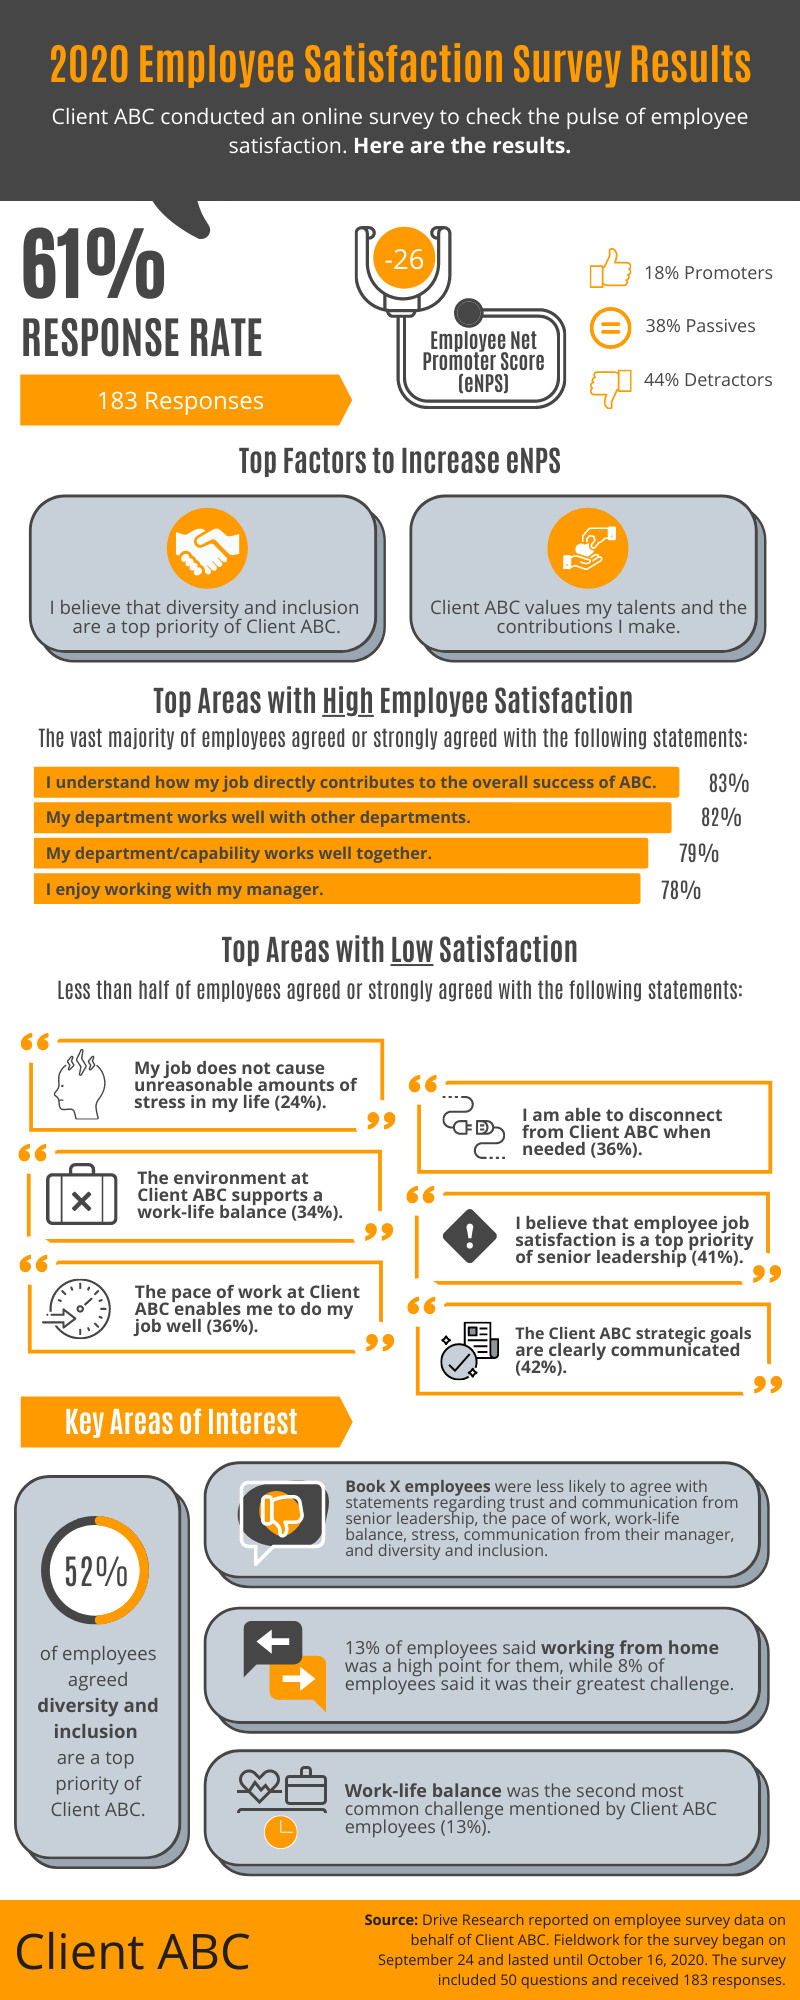 Example employee survey infographic by Drive Research